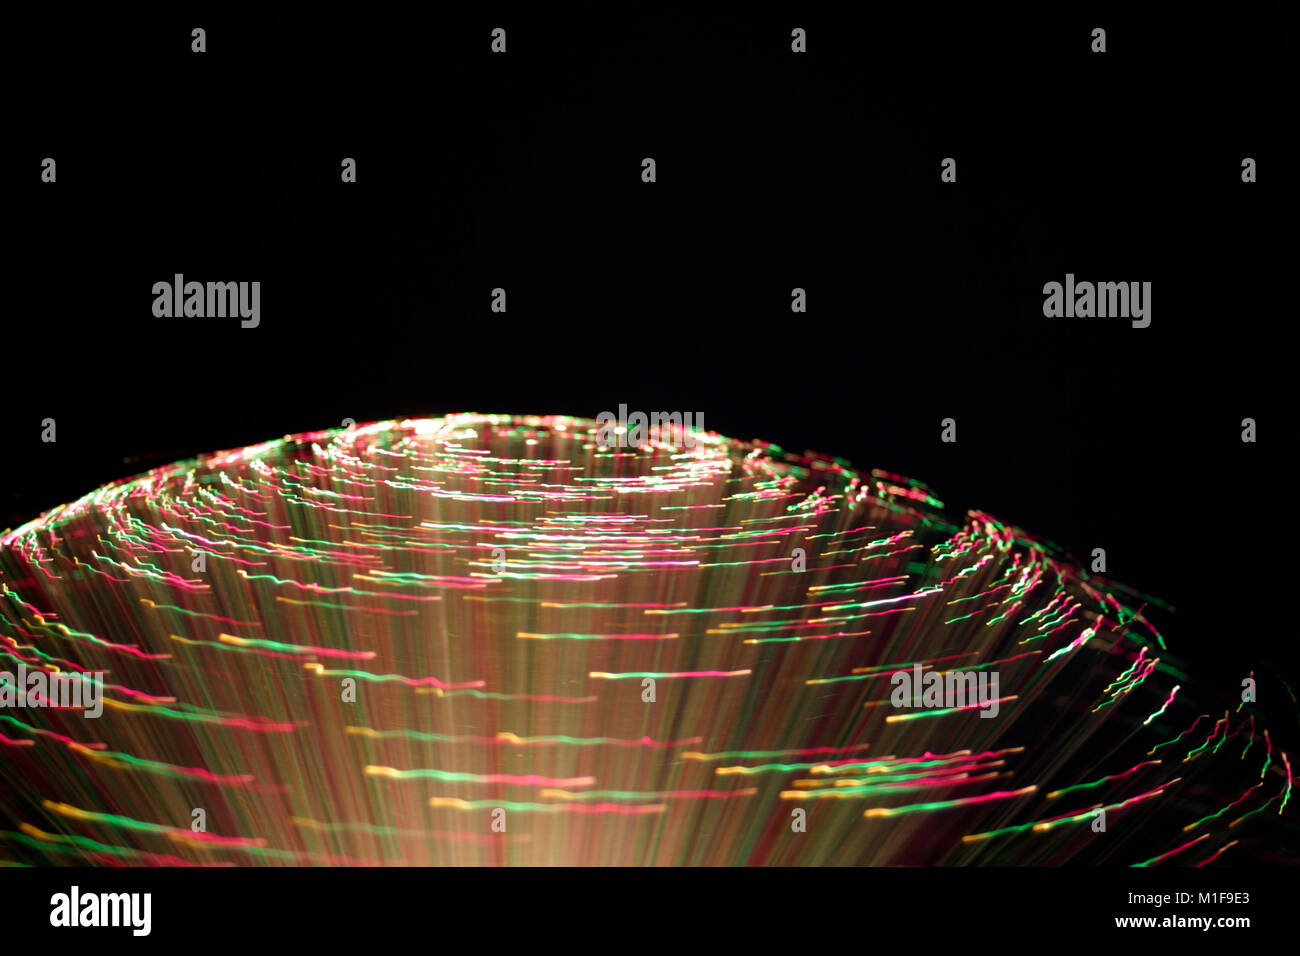 Fibre optic lamps, multi-coloured abstract on black background Stock Photo